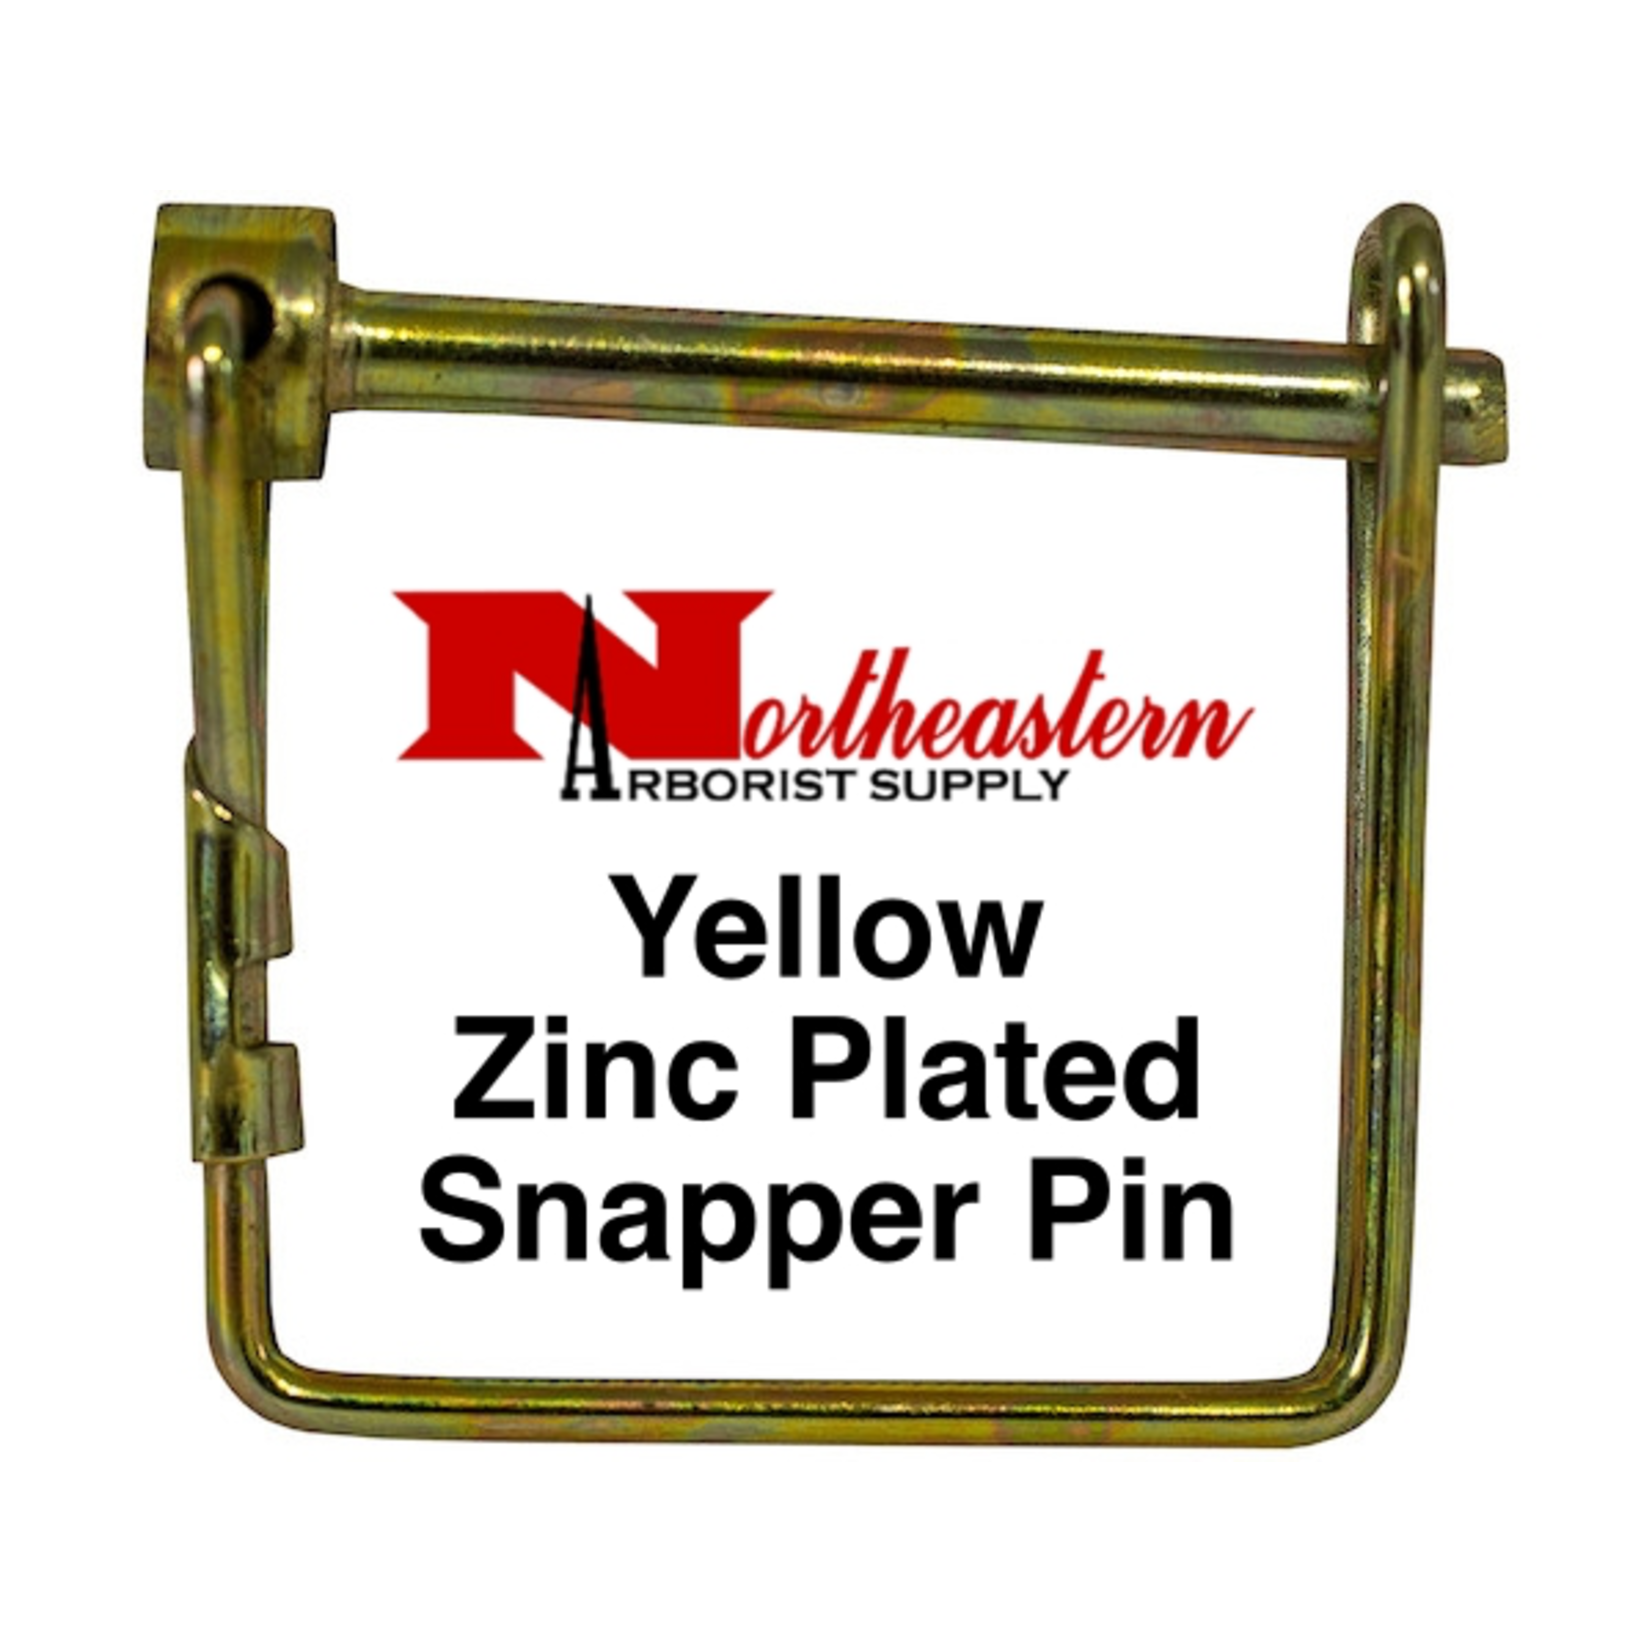 Buyers Pin, 1/4 Diameter X 3 Usable, Yellow Zinc Plated, Snapper Style Pin